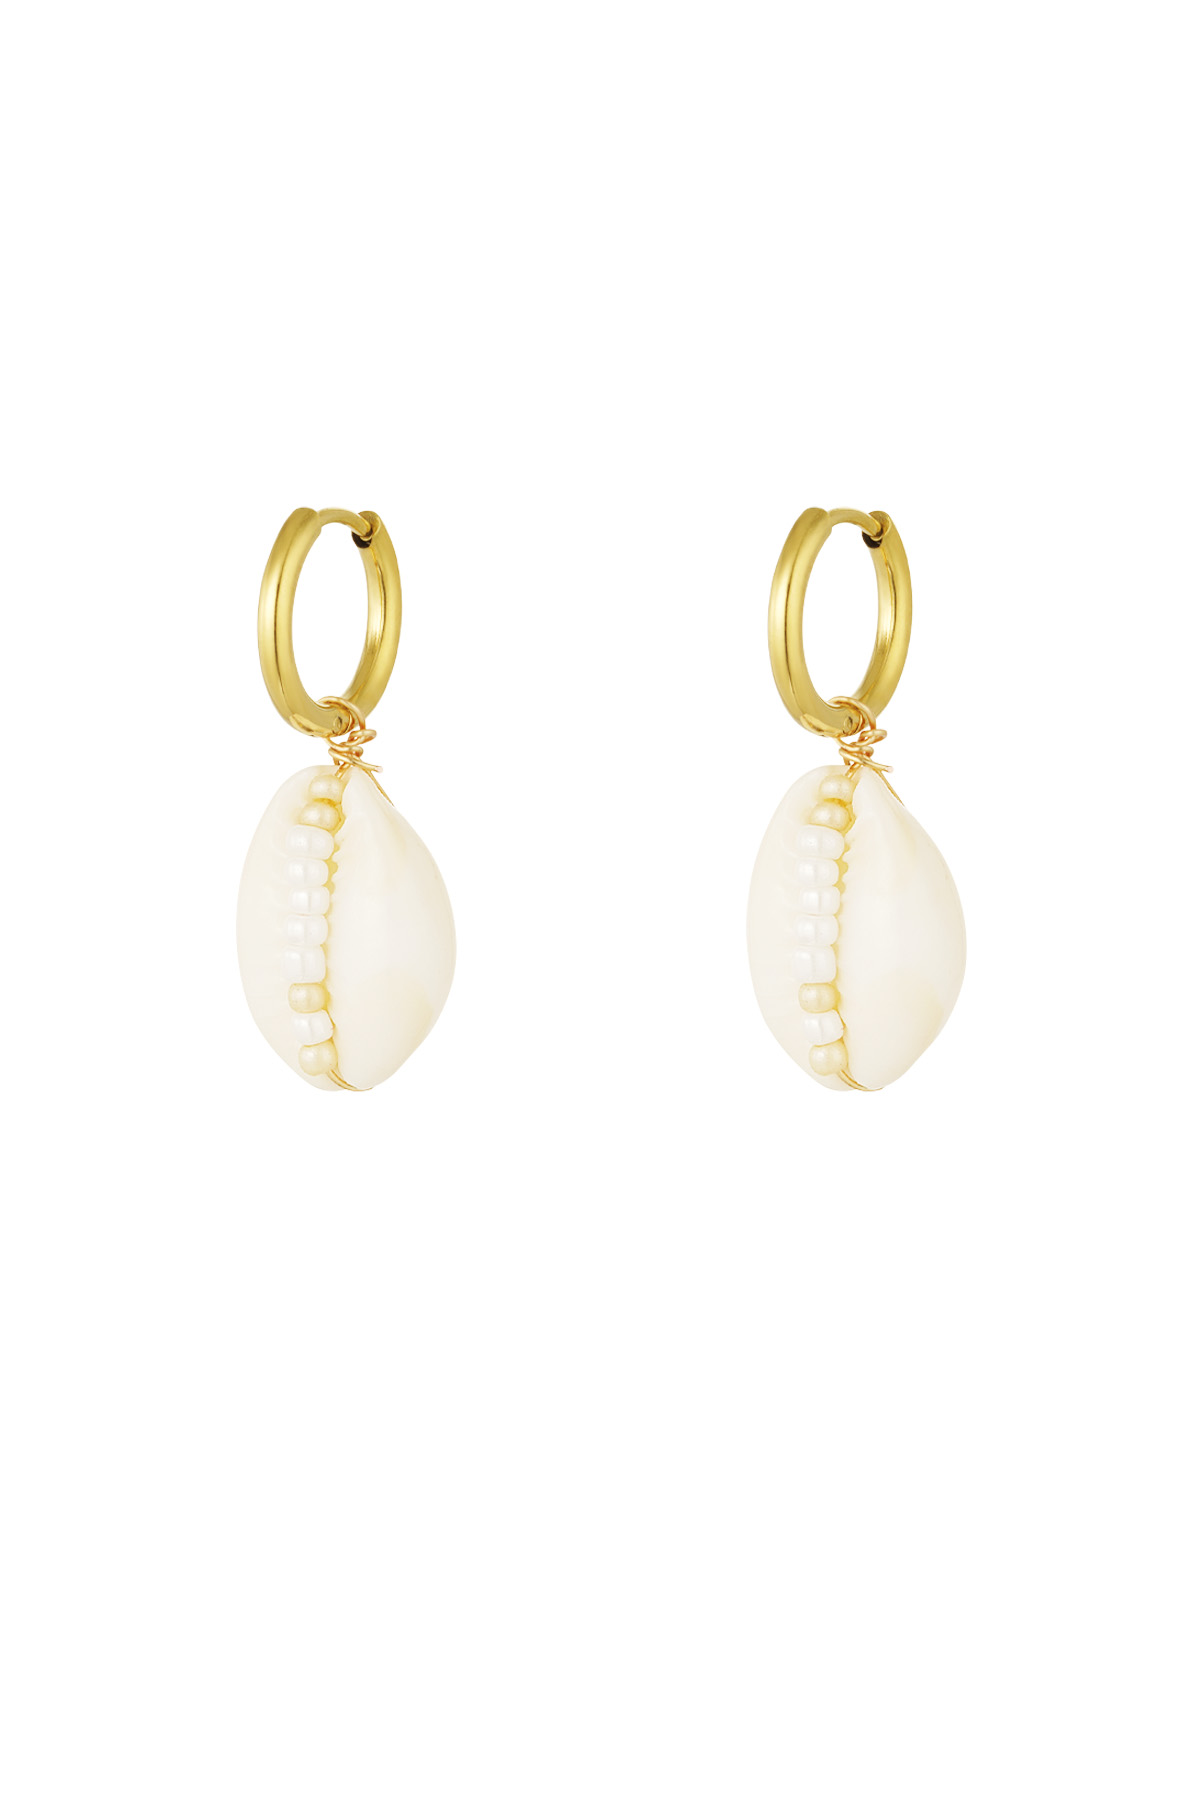 Stainless Steel Earrings with Seashell and Glass Beads - White h5 